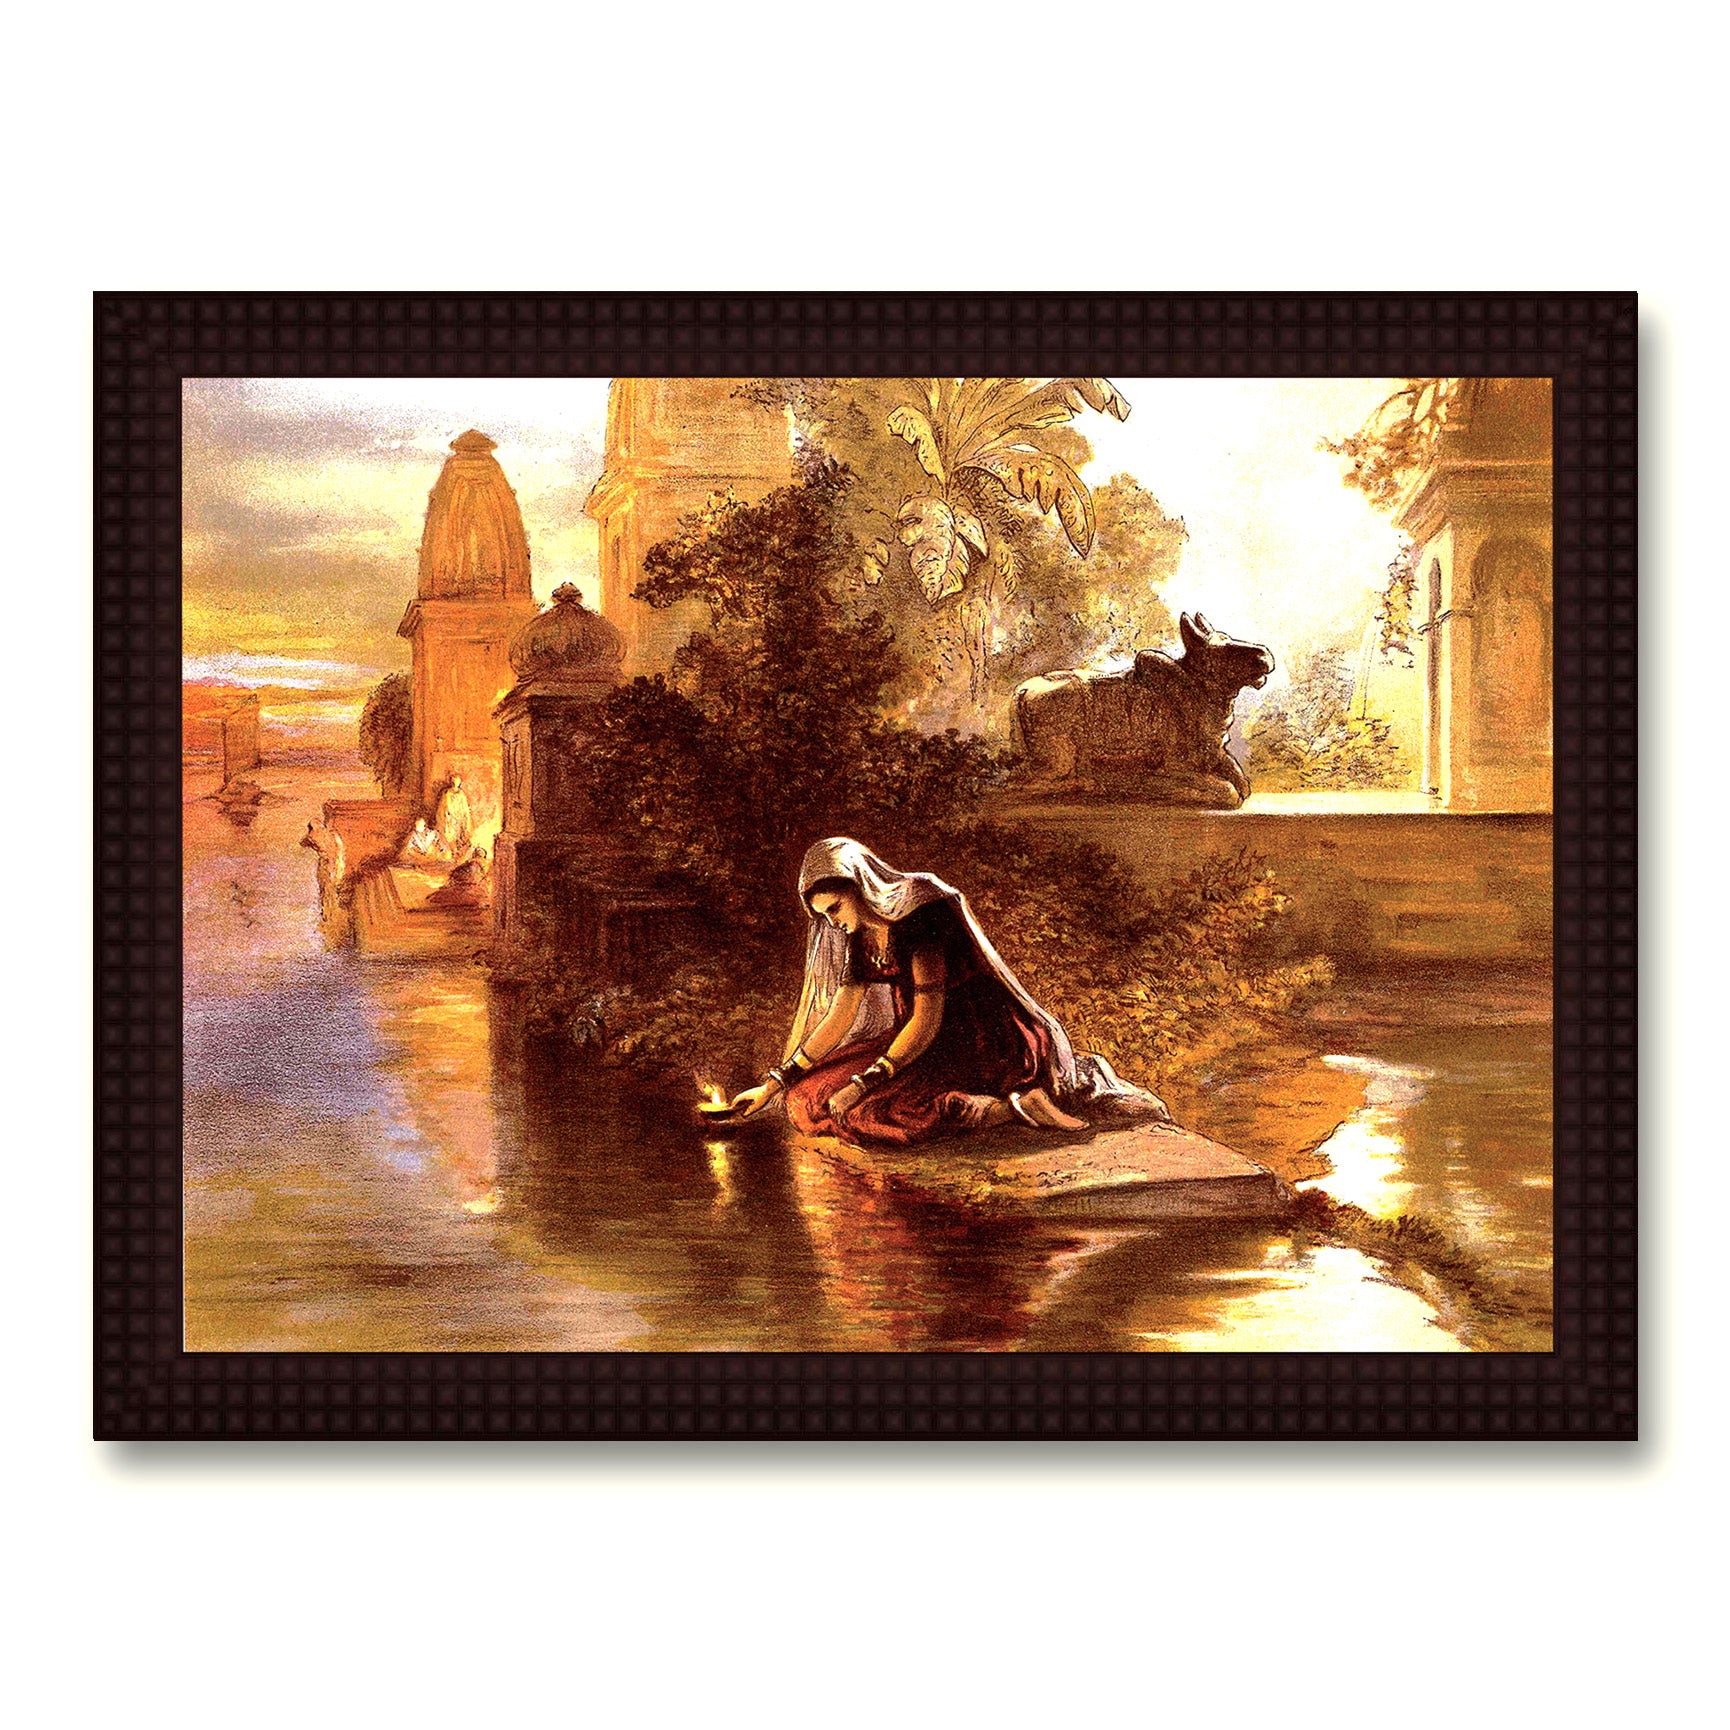 A Girl praying on a River Side